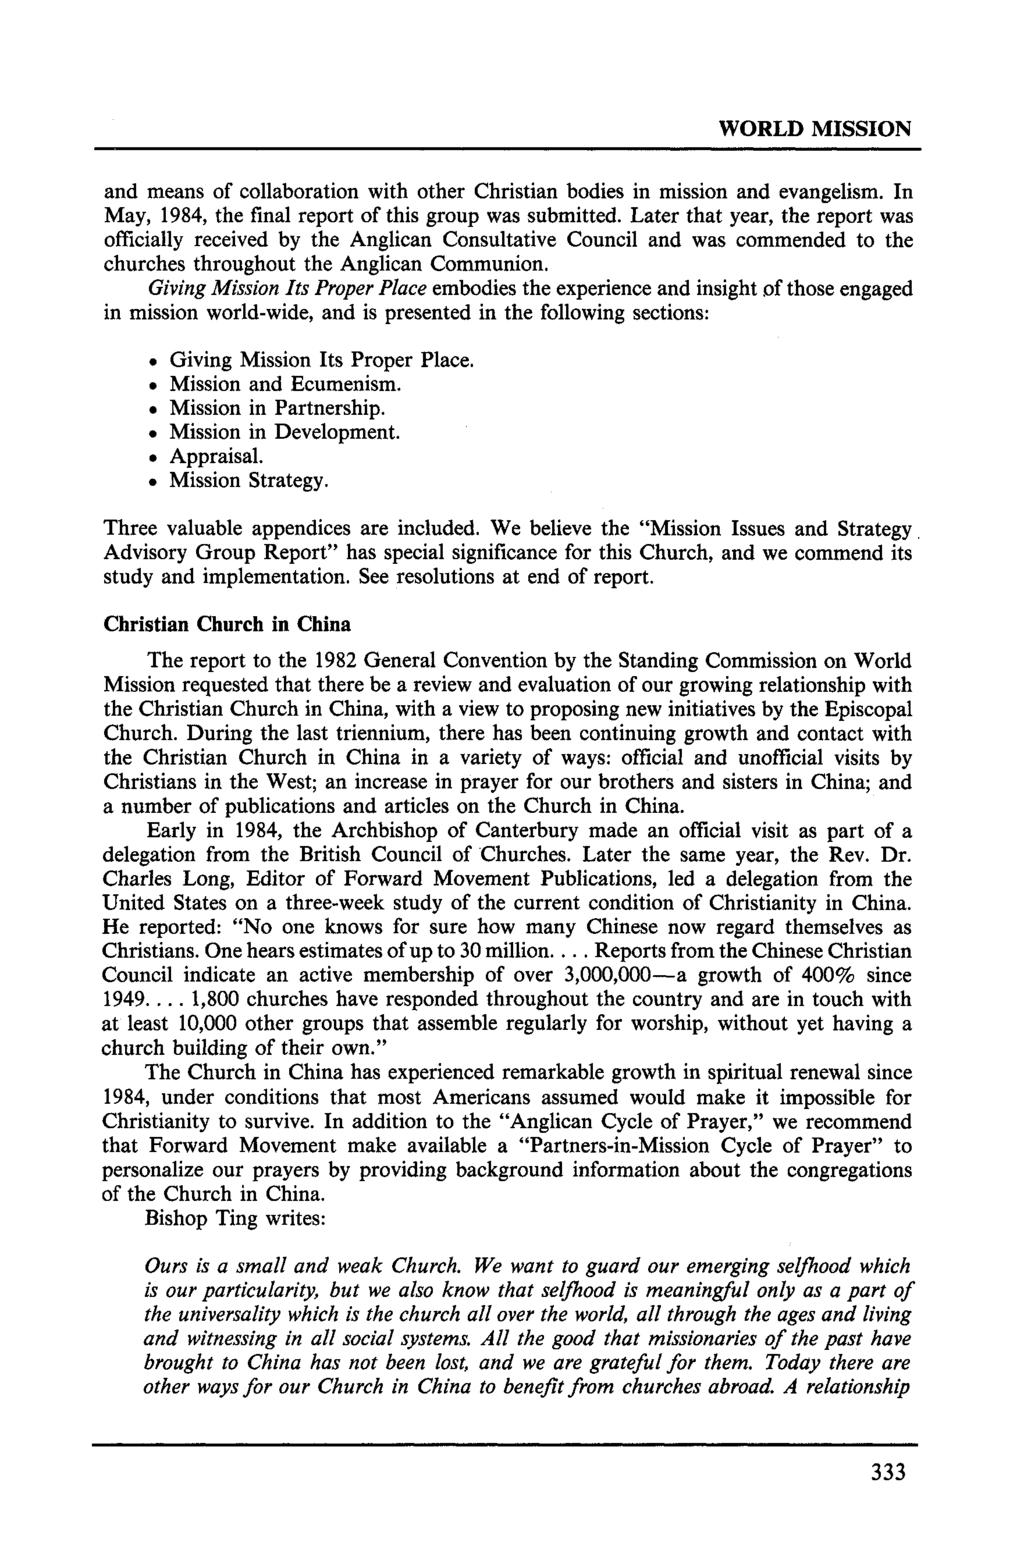 WORLD MISSION and means of collaboration with other Christian bodies in mission and evangelism. In May, 1984, the final report of this group was submitted.